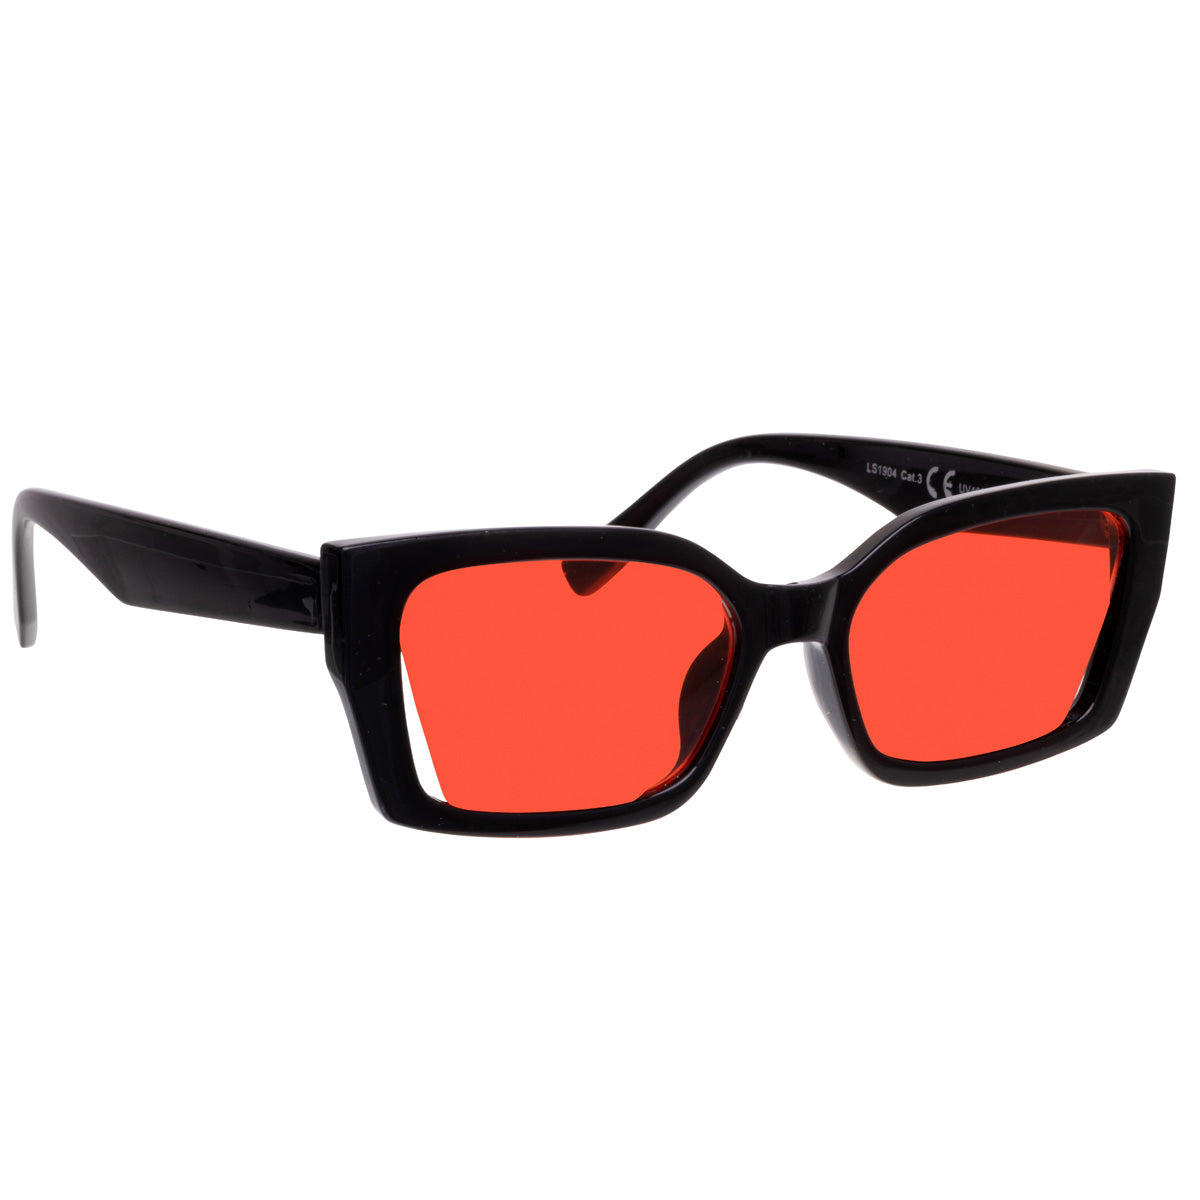 Rectangular angled sunglasses with open lens